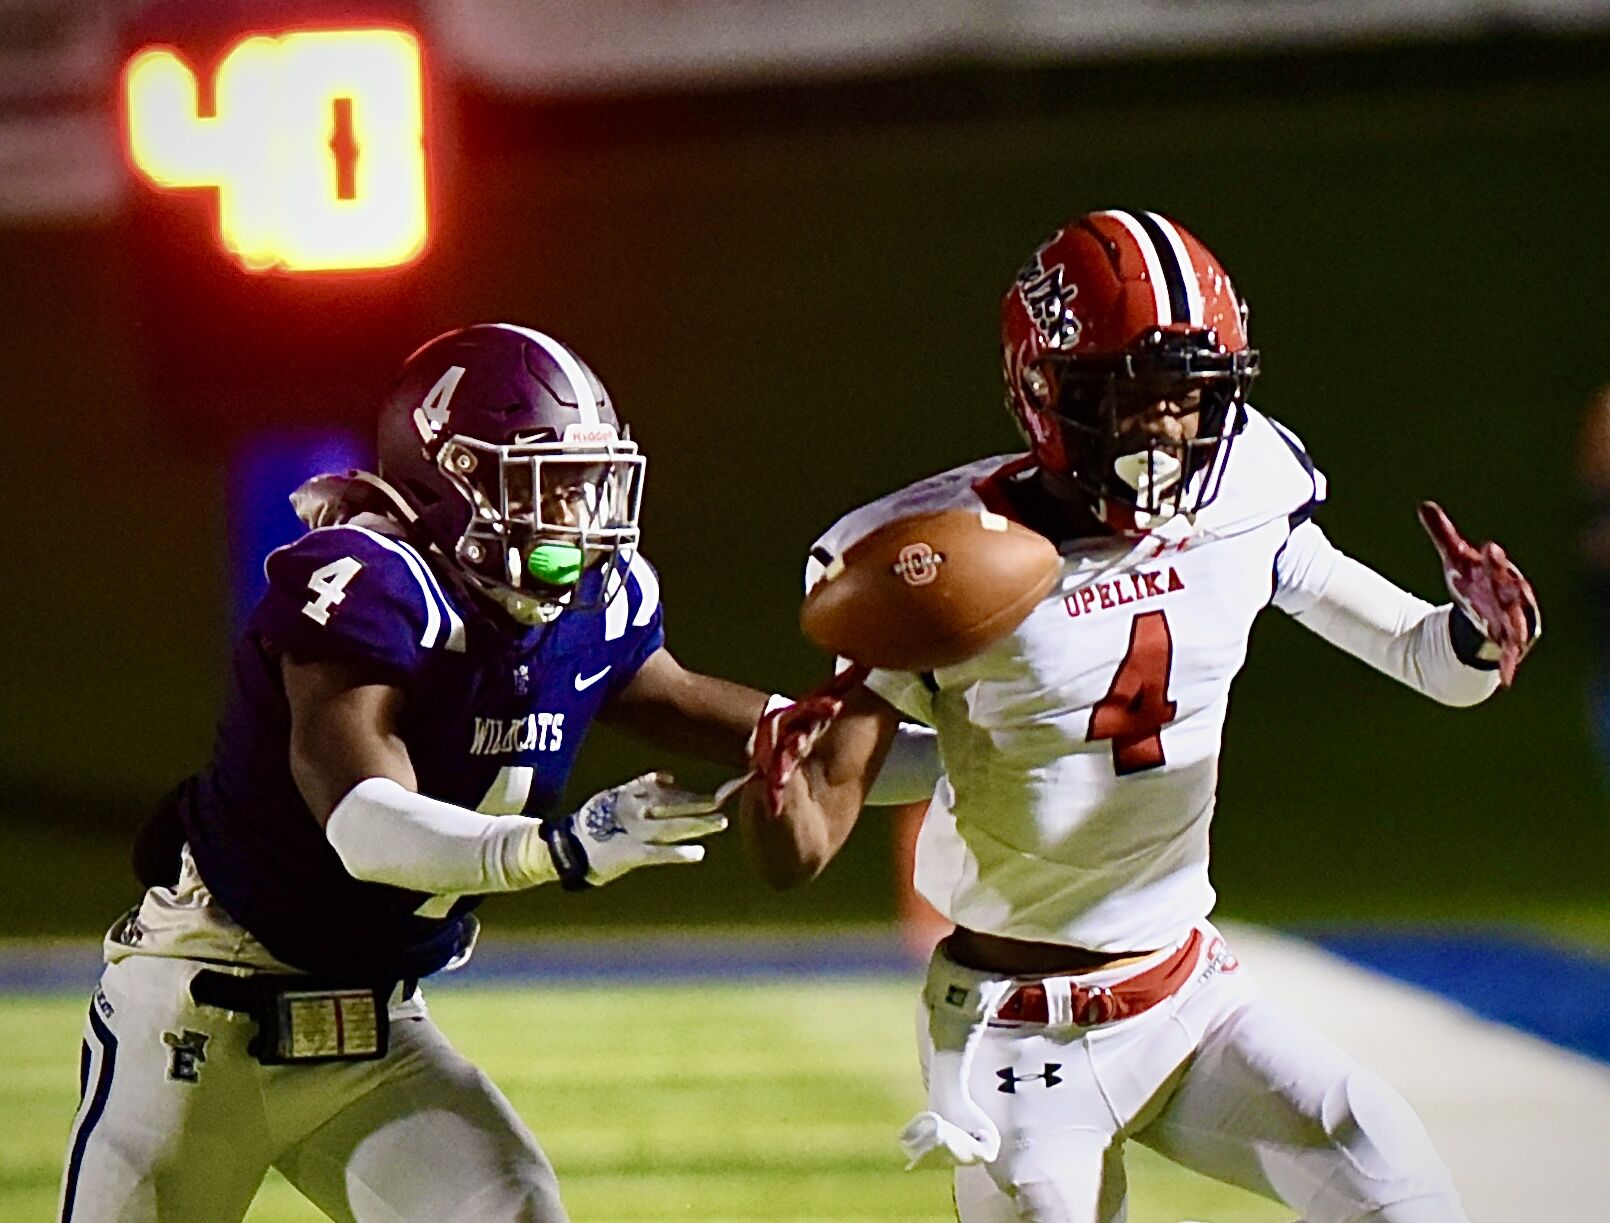 Keion Dunlap leads Enterprise to 28-14 victory over Opelika with 143 rushing yards and three touchdowns